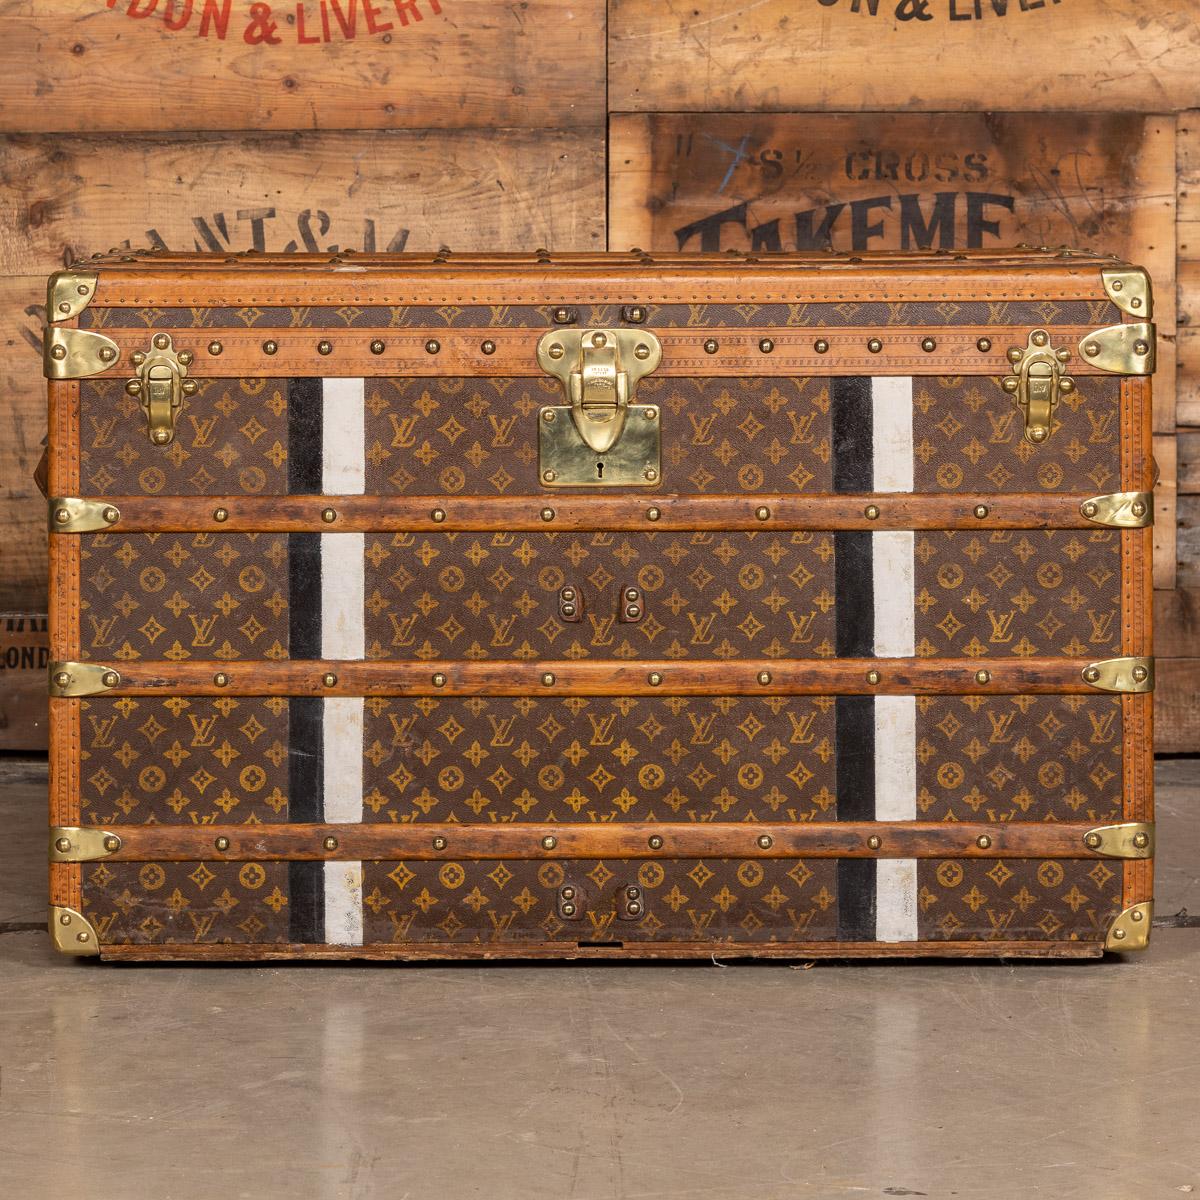 Antique early 20th century cabin trunk made by Louis Vuitton. Covered in the world famous LV monogrammed canvas, with its lozine borders and brass fittings, it would have been the top of the line even at the time of purchase some 100+ years ago.